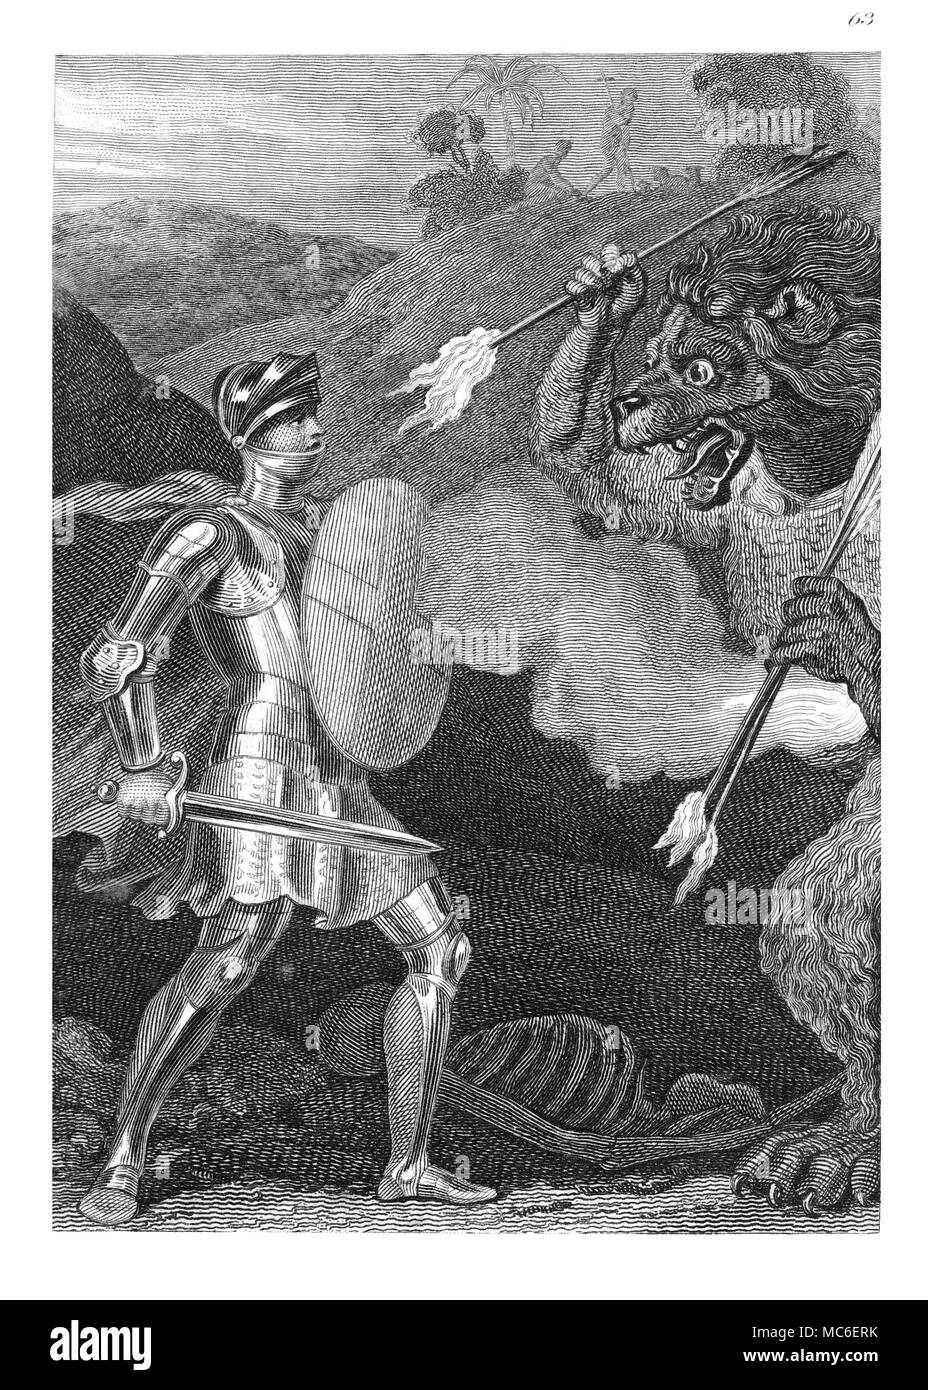 DEMONS Engraving by McGahey of a drawing by W.M. Craig, as illustration to Bunyan's Pilgrim's Progess. The demon is in the form of a savage lion. Stock Photo